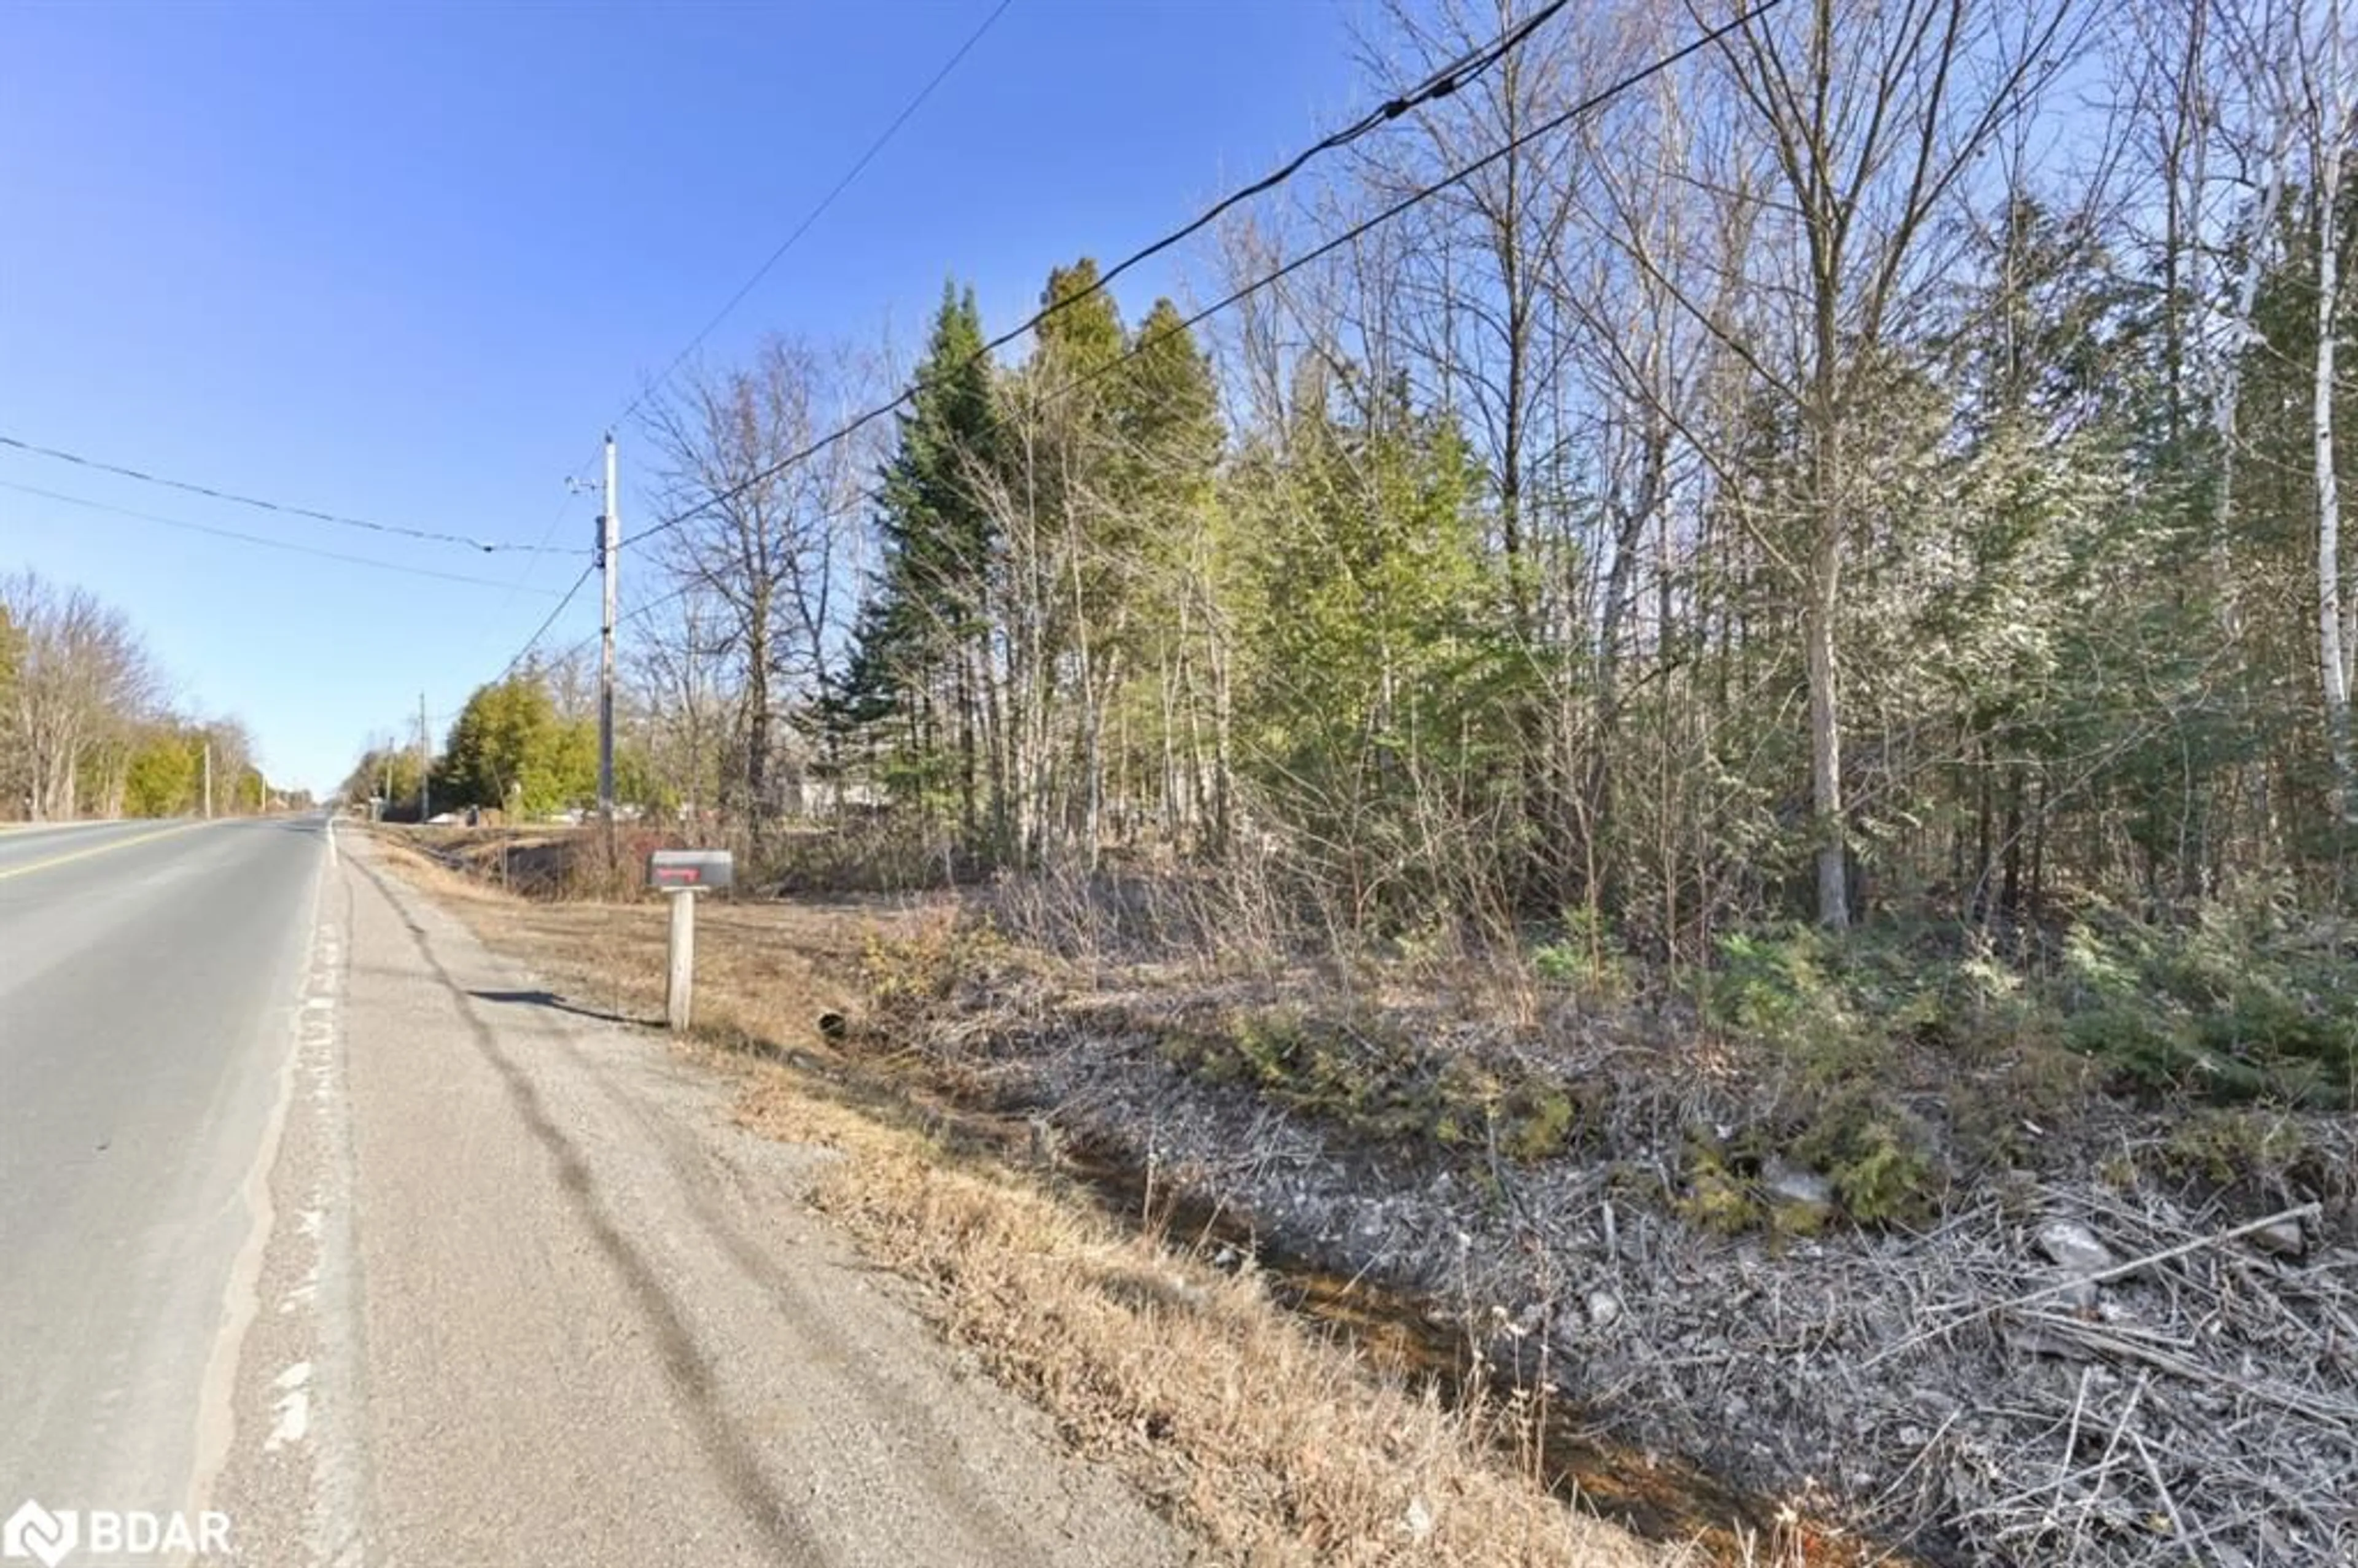 Street view for 0 Quin Mo Lac Rd, Madoc Ontario K0K 2K0